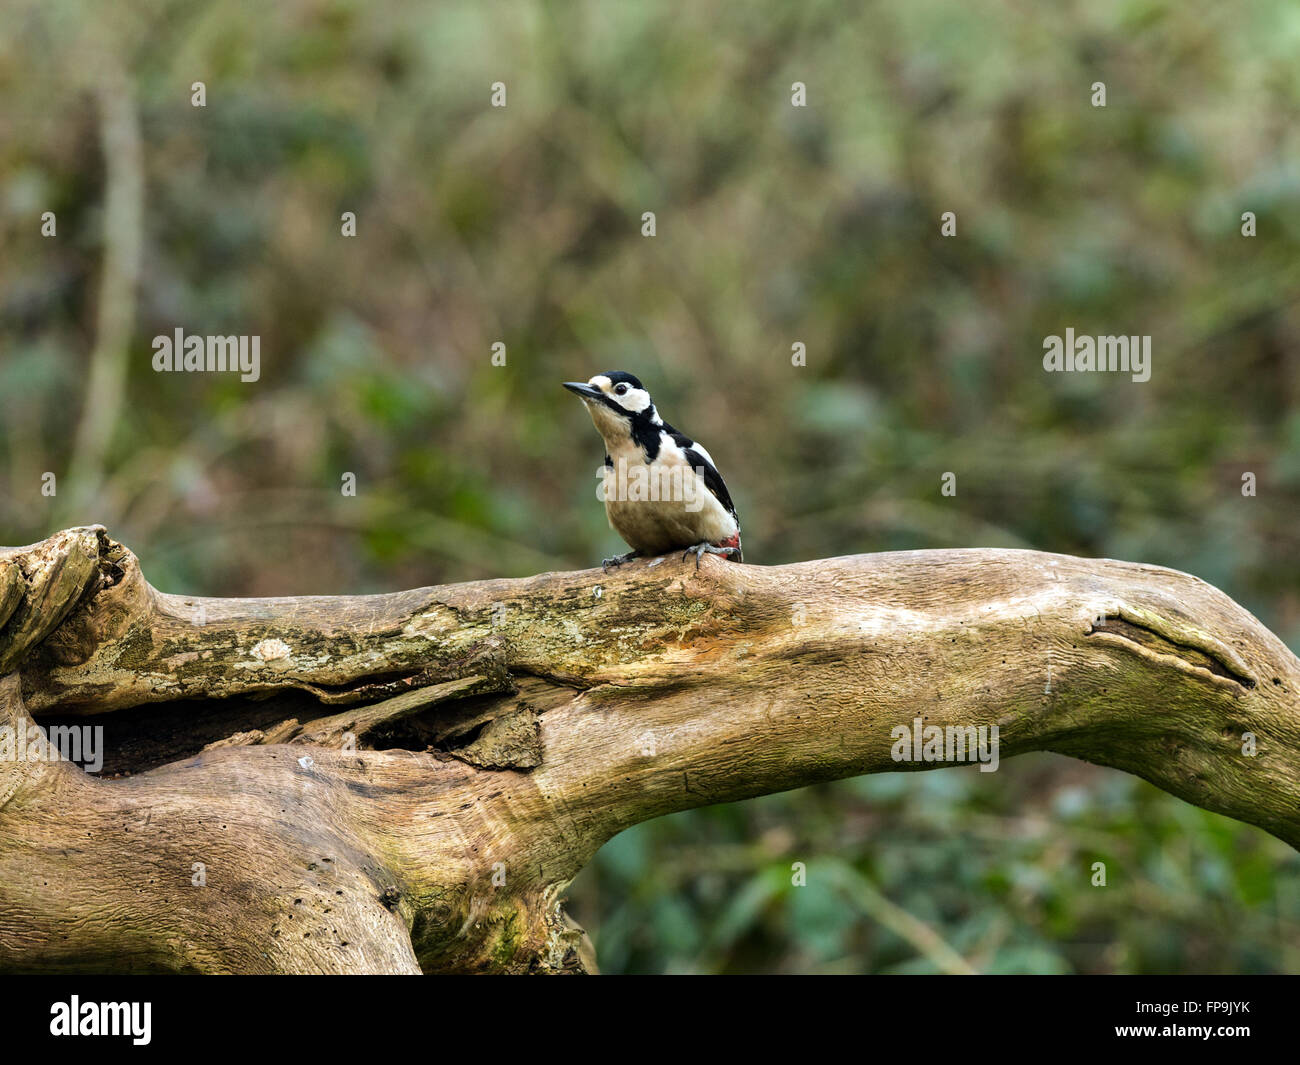 Single Great Spotted Woodpecker (Dendrocopos major) foraging in a natural woodland countryside setting. Stock Photo